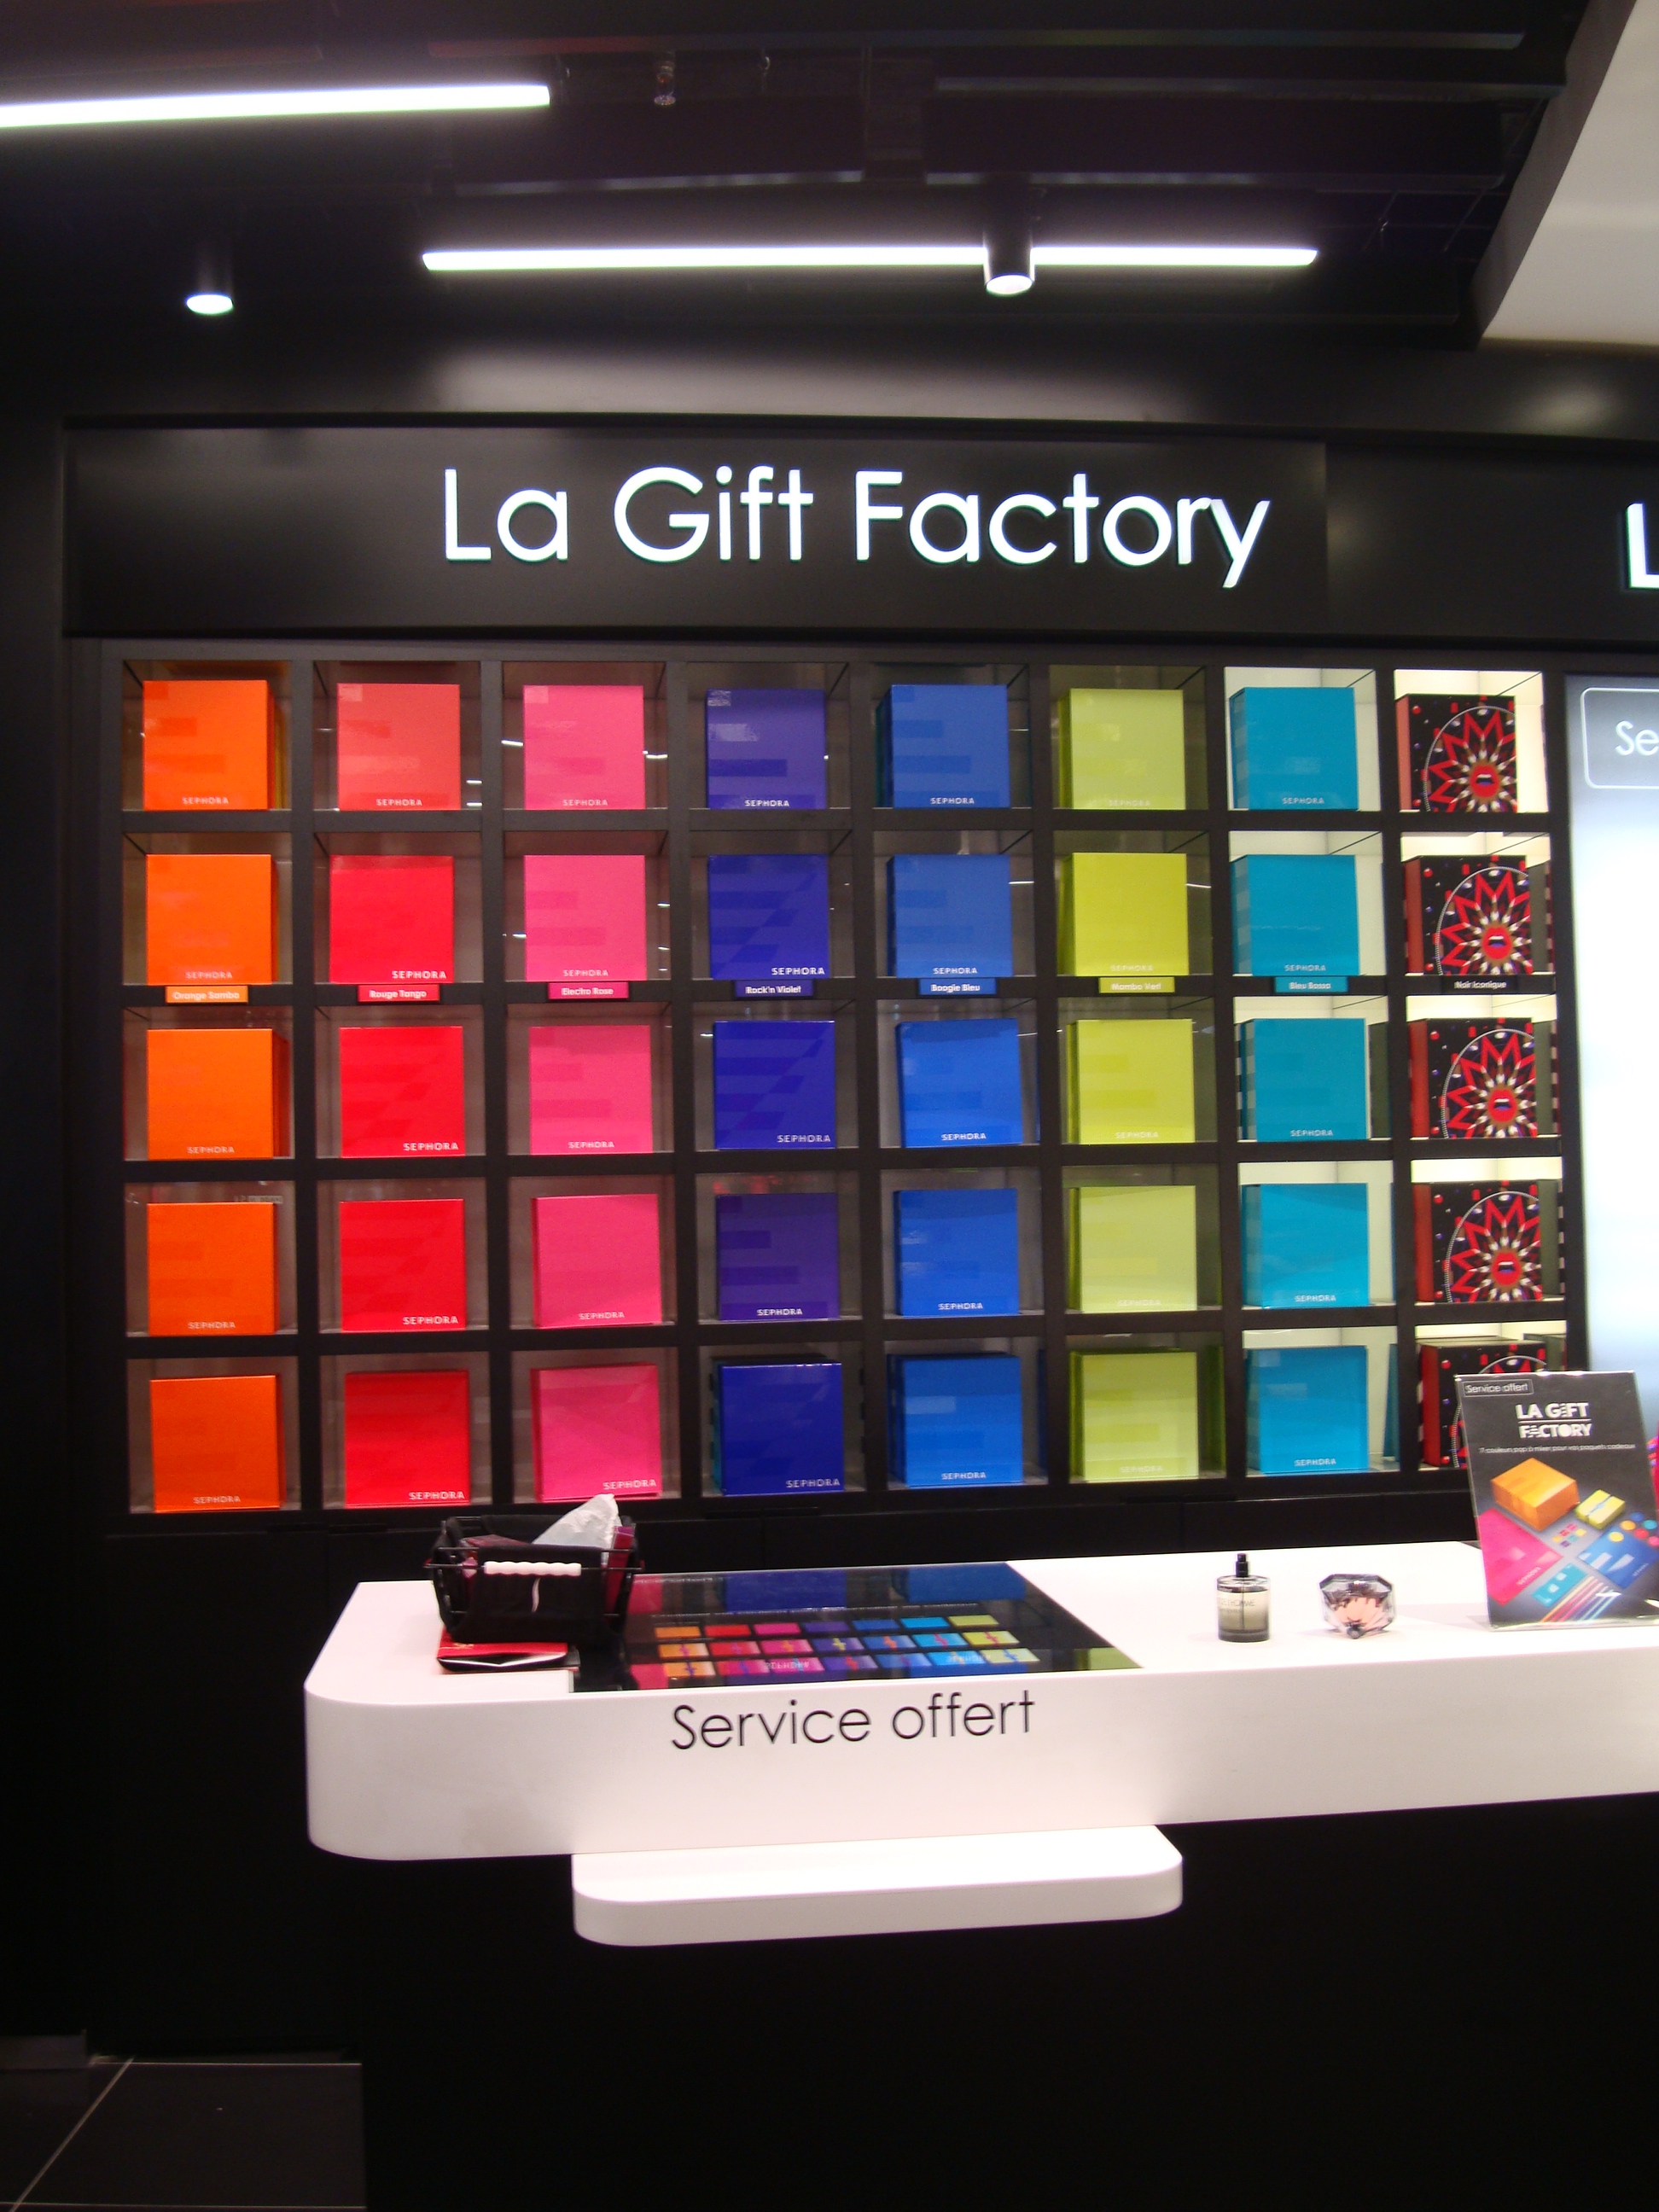 La Gift Factory TODAY IS A GIFT